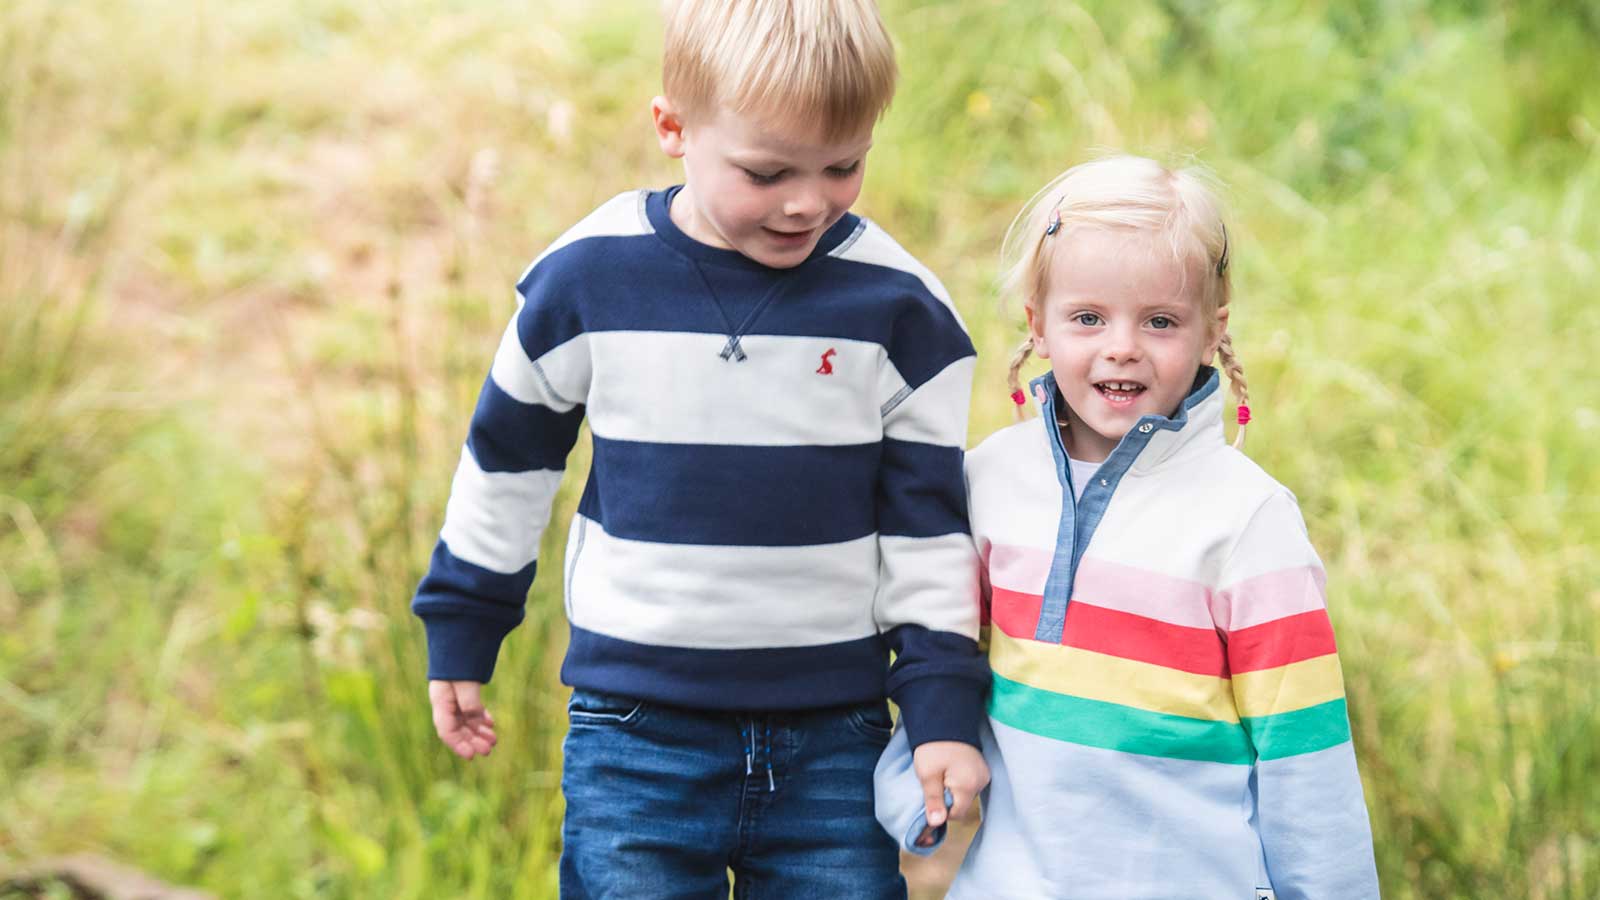 Little Joules Childrens Clothing & Accessories